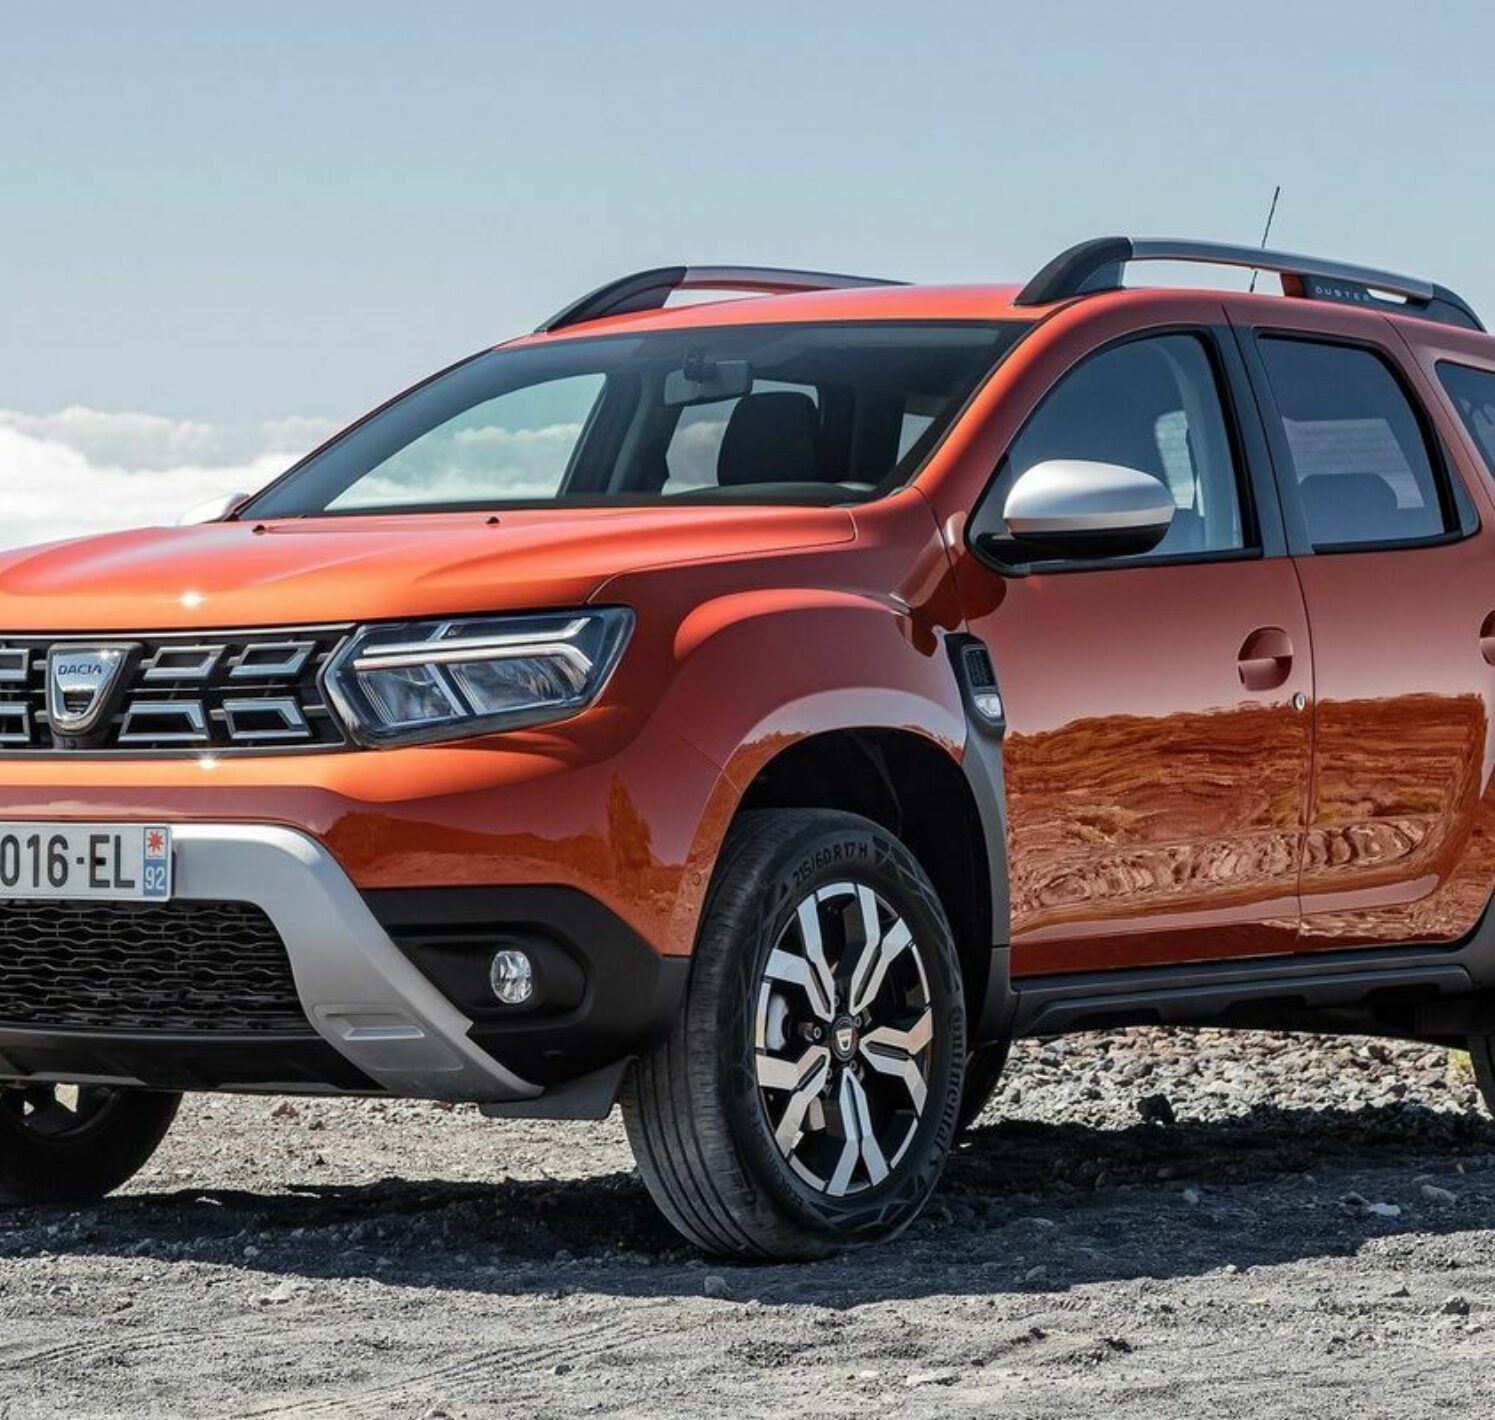 https://autofilter.sk/assets/images/duster/gallery/dacia-duster-2021_29-galeria.jpeg - obrazok